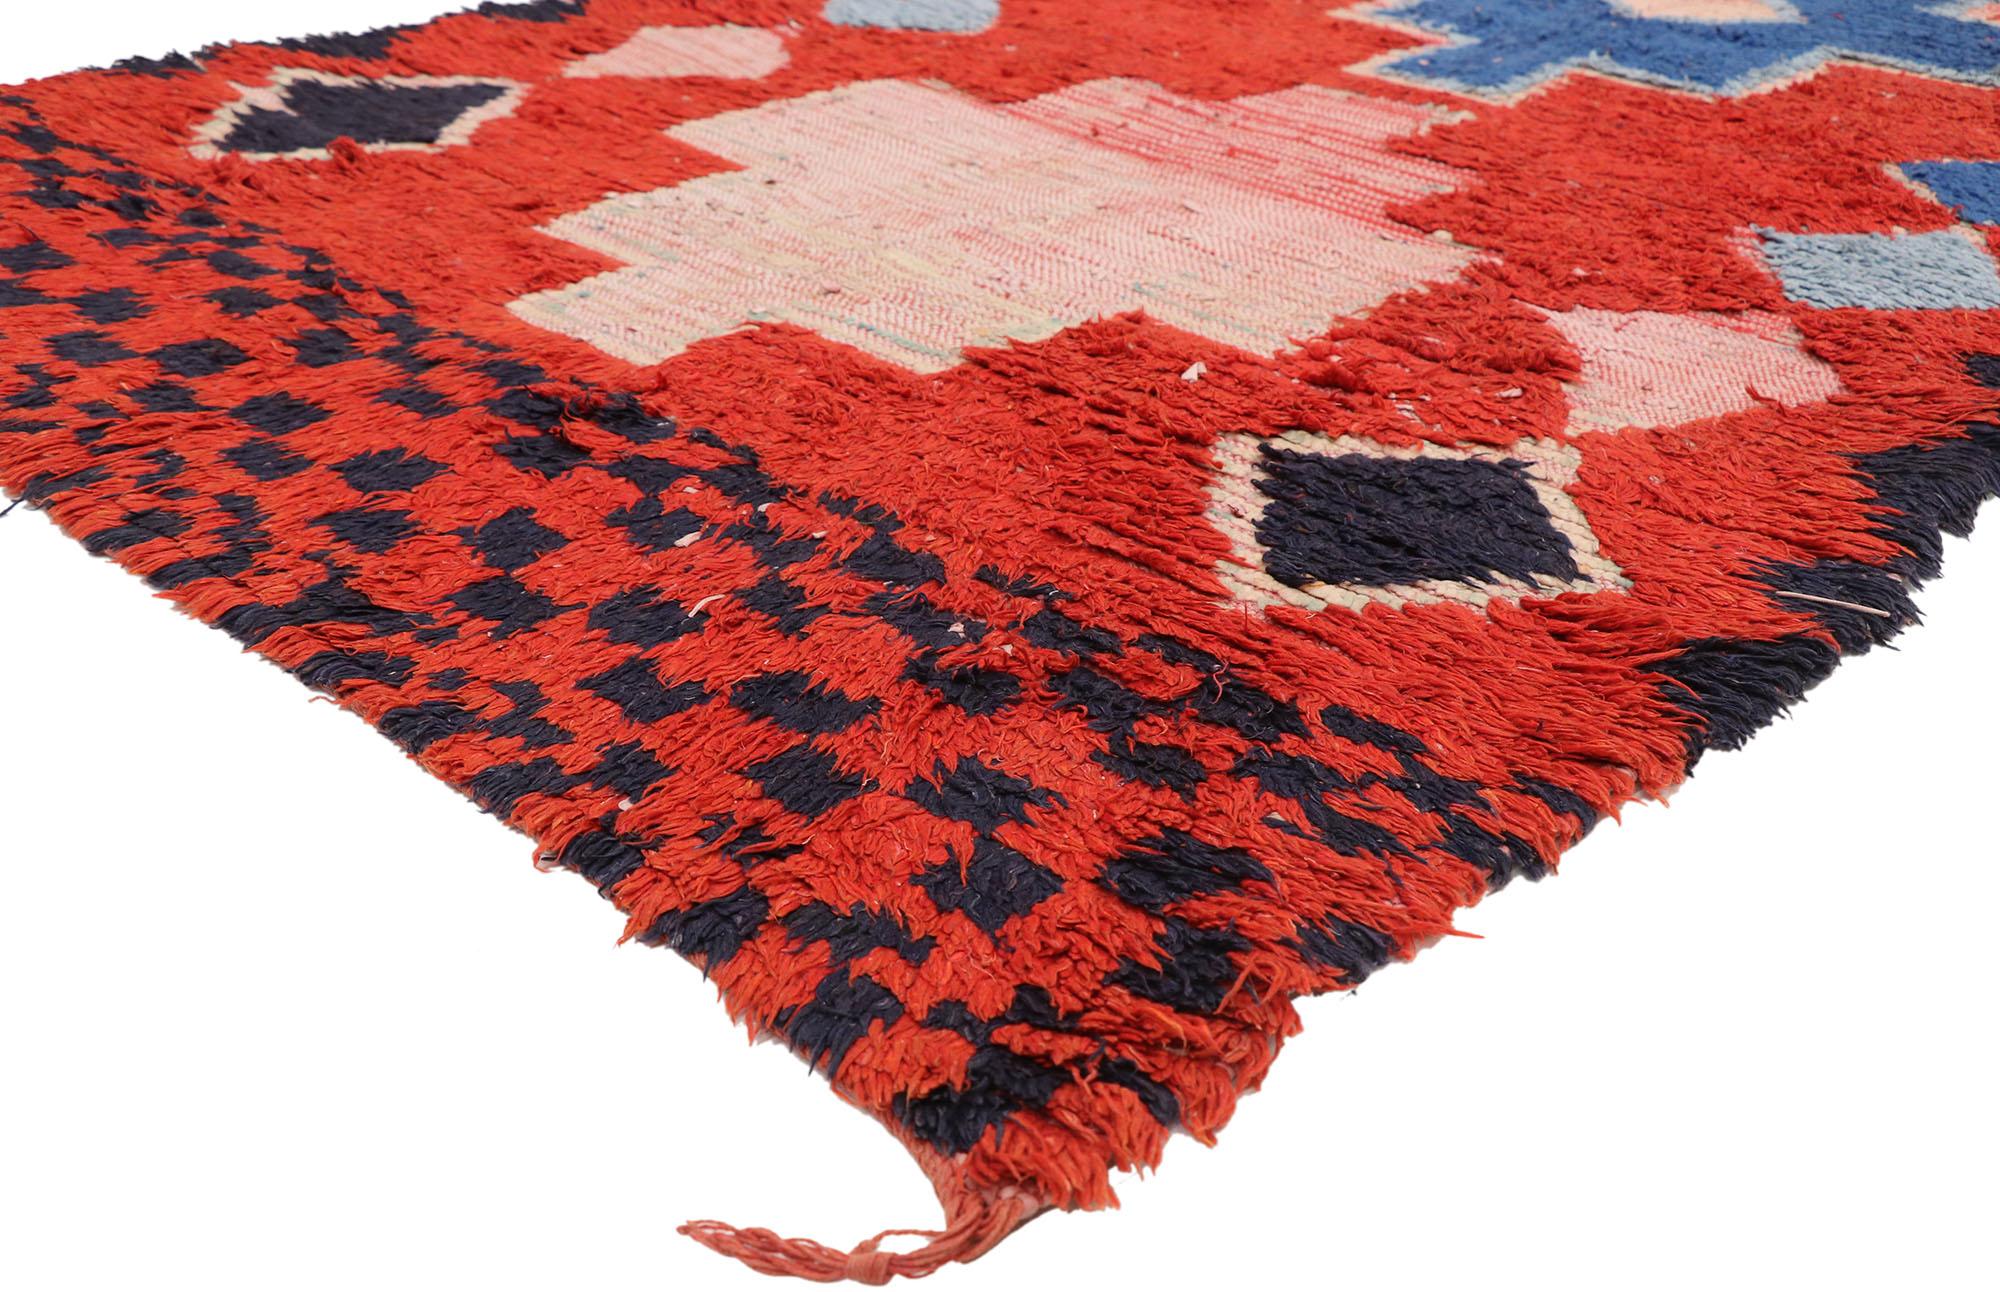 20219 Vintage Red Boujad Moroccan Rug, 04’06 x 09’04. Boujad rugs are handwoven carpets originating from the Boujad region in the Middle Atlas Mountains of Morocco. Traditionally crafted by Berber tribes, particularly the Haouz and Rehamna tribes,